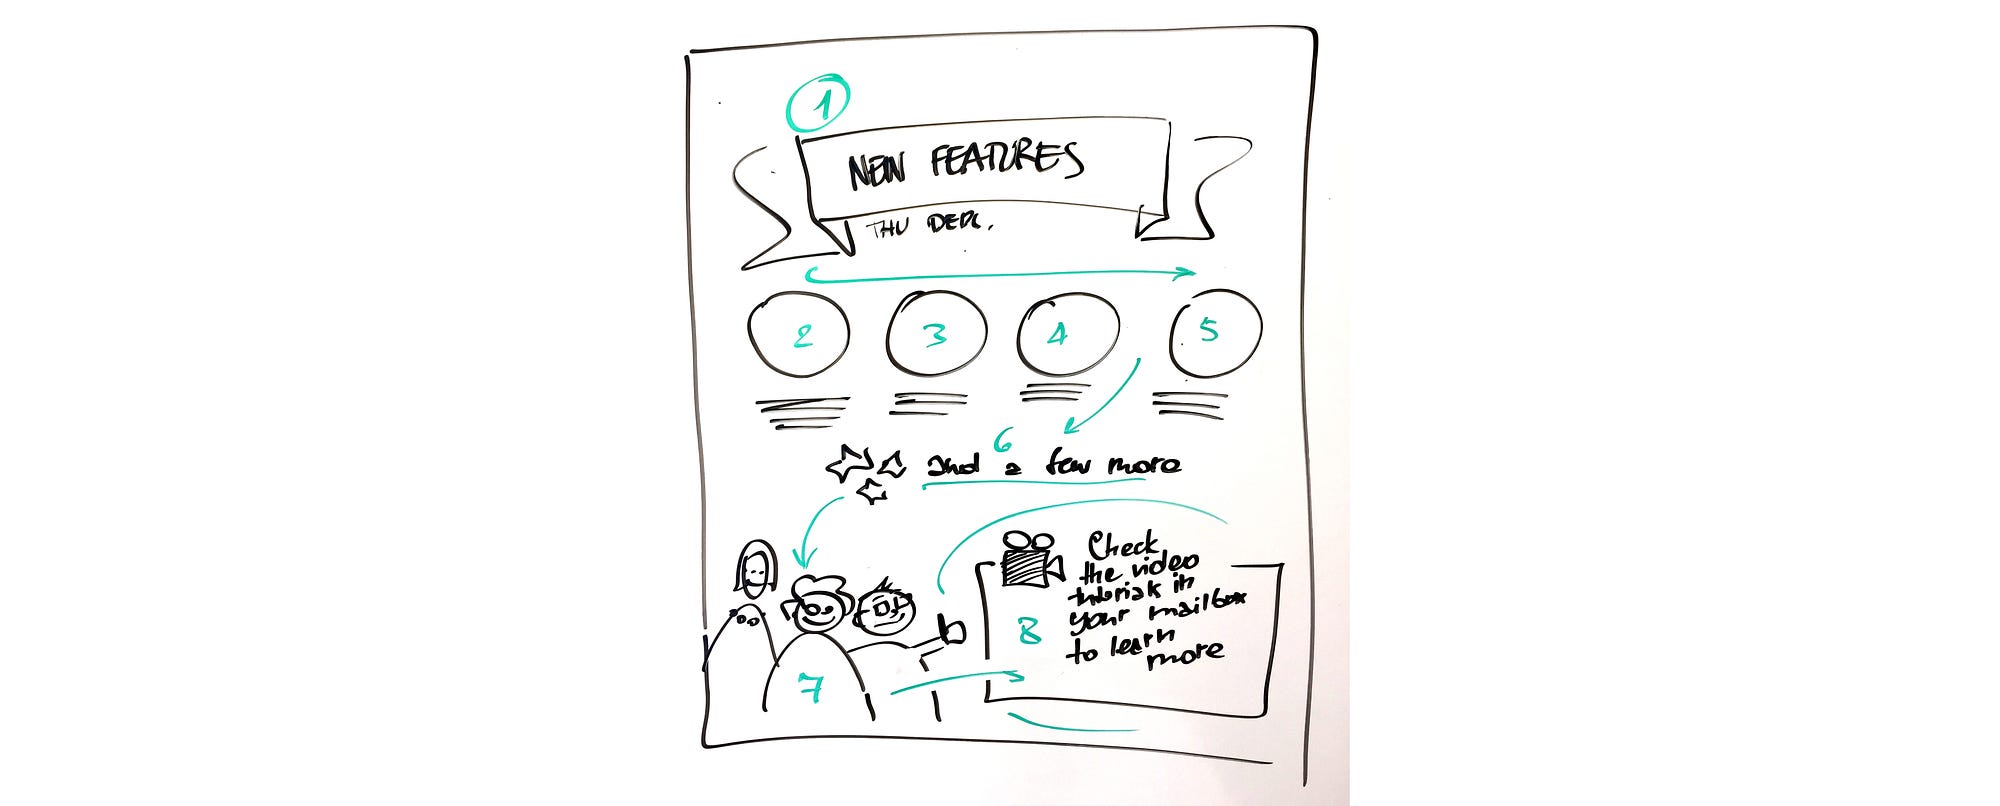 Learn these two simple techniques that will dramatically improve your  whiteboard skills, by Yuri Malishenko, graphicfacilitation